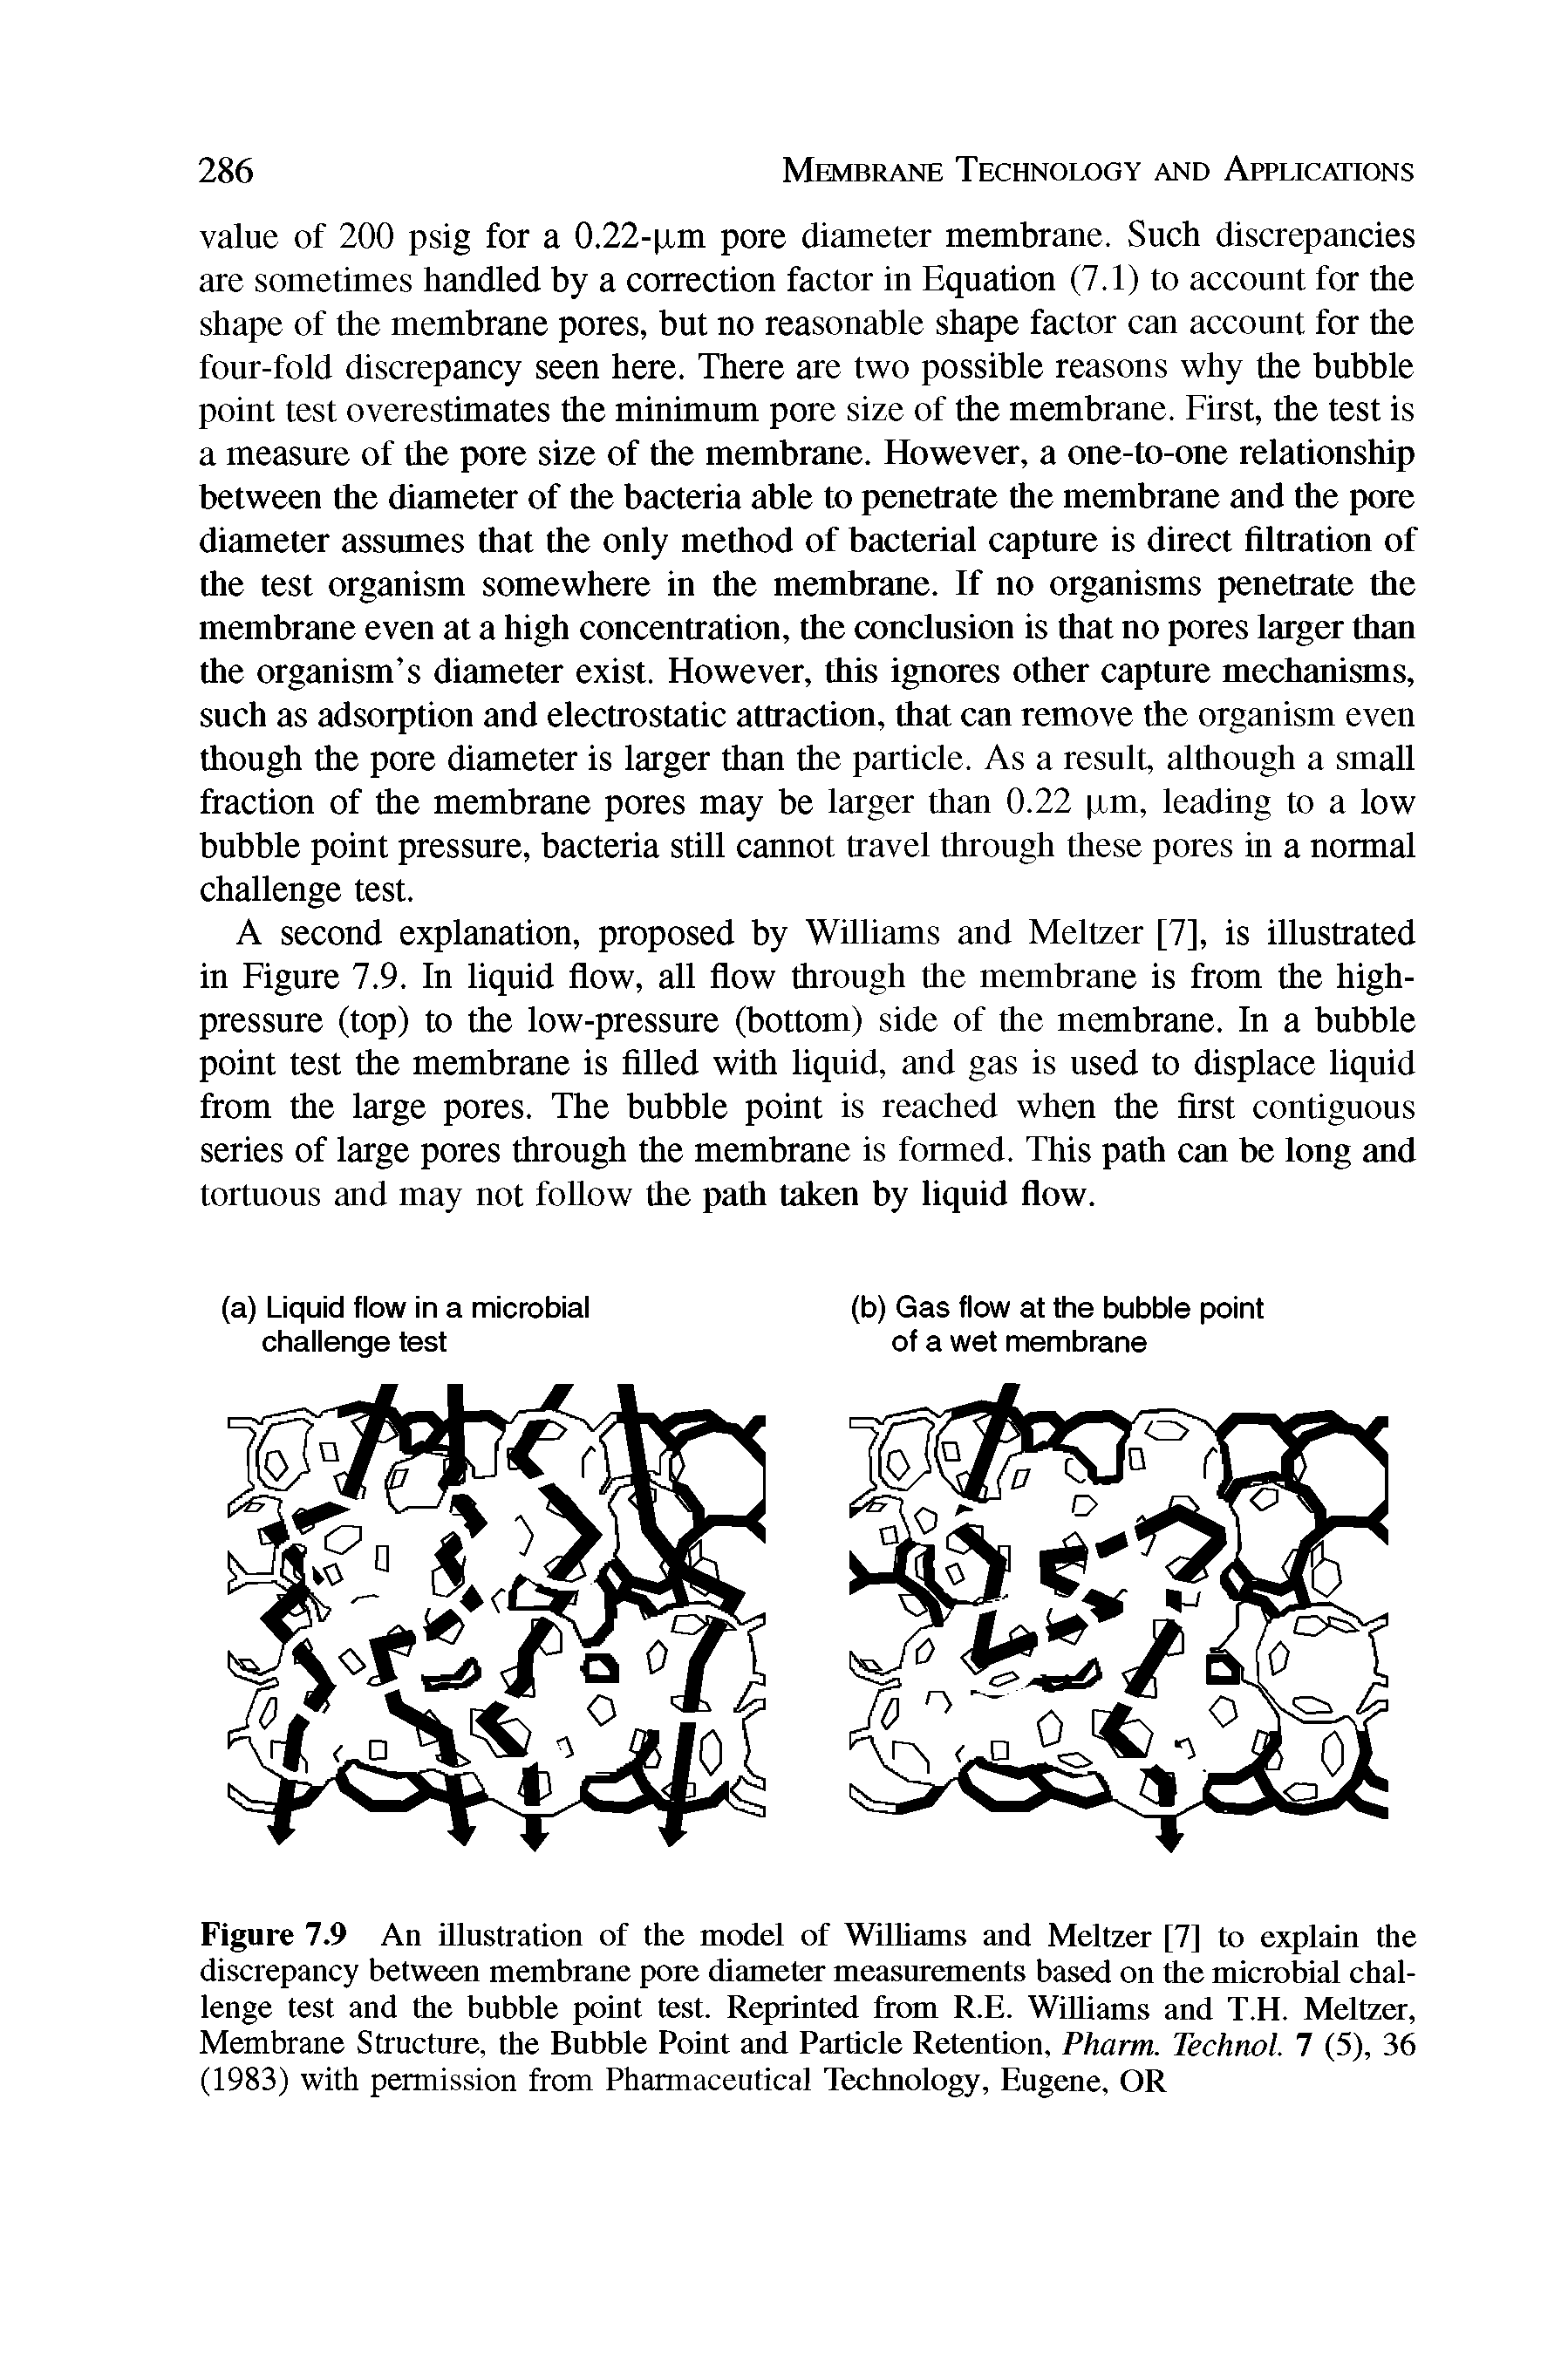 Figure 7.9 An illustration of the model of Williams and Meltzer [7] to explain the discrepancy between membrane pore diameter measurements based on the microbial challenge test and the bubble point test. Reprinted from R.E. Williams and T.H. Meltzer, Membrane Structure, the Bubble Point and Particle Retention, Pharm. Technol. 7 (5), 36 (1983) with permission from Pharmaceutical Technology, Eugene, OR...